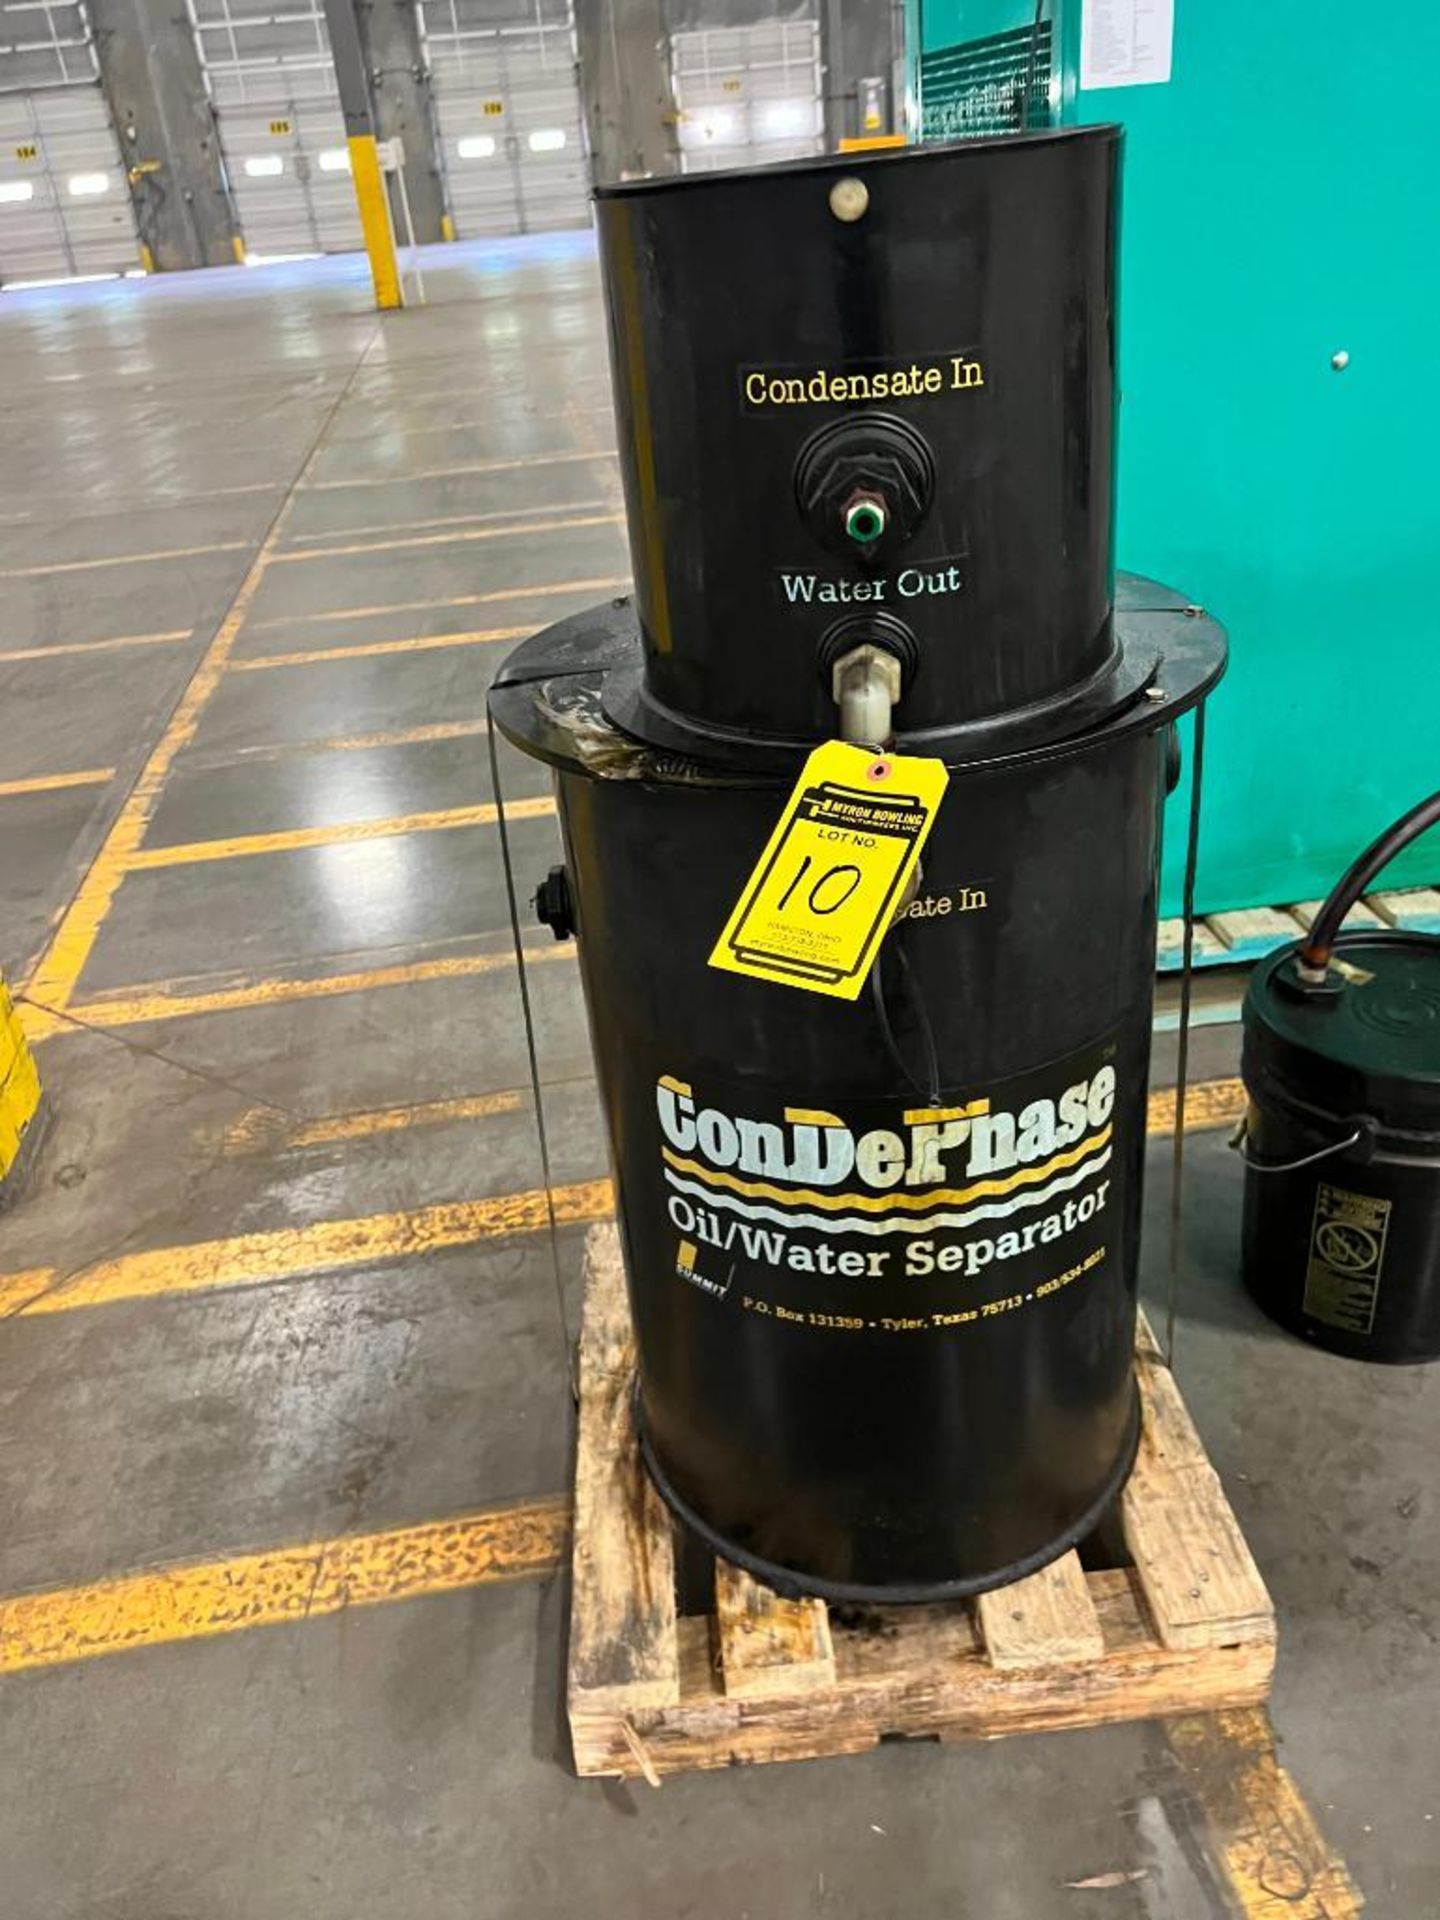 Condephase Oil/Water Separator